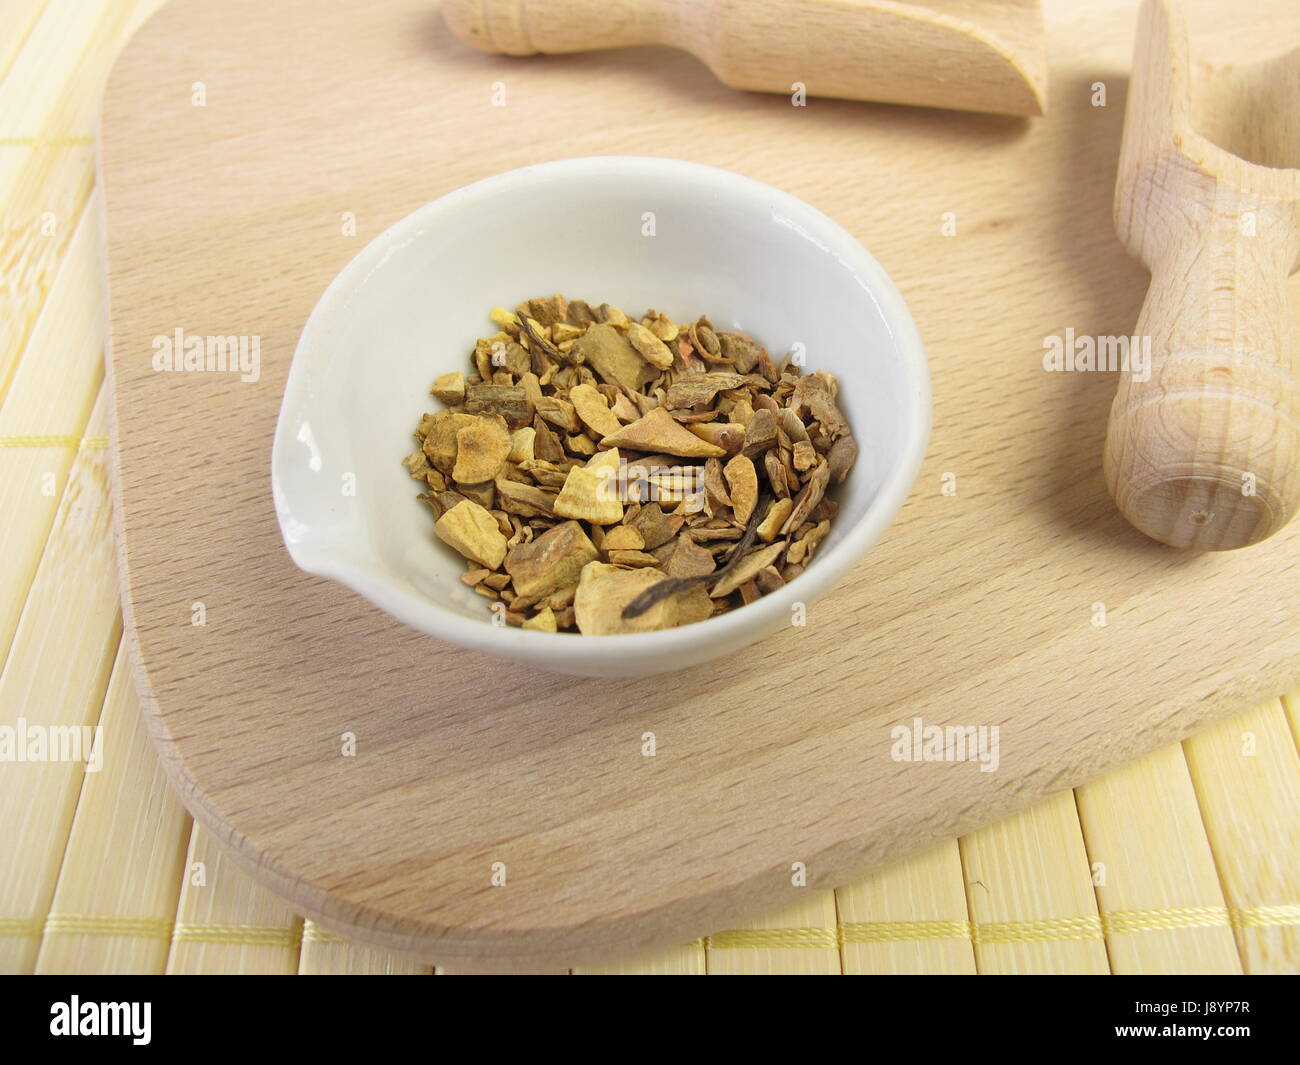 root, material, drug, anaesthetic, addictive drug, naturopathy, root, material, Stock Photo